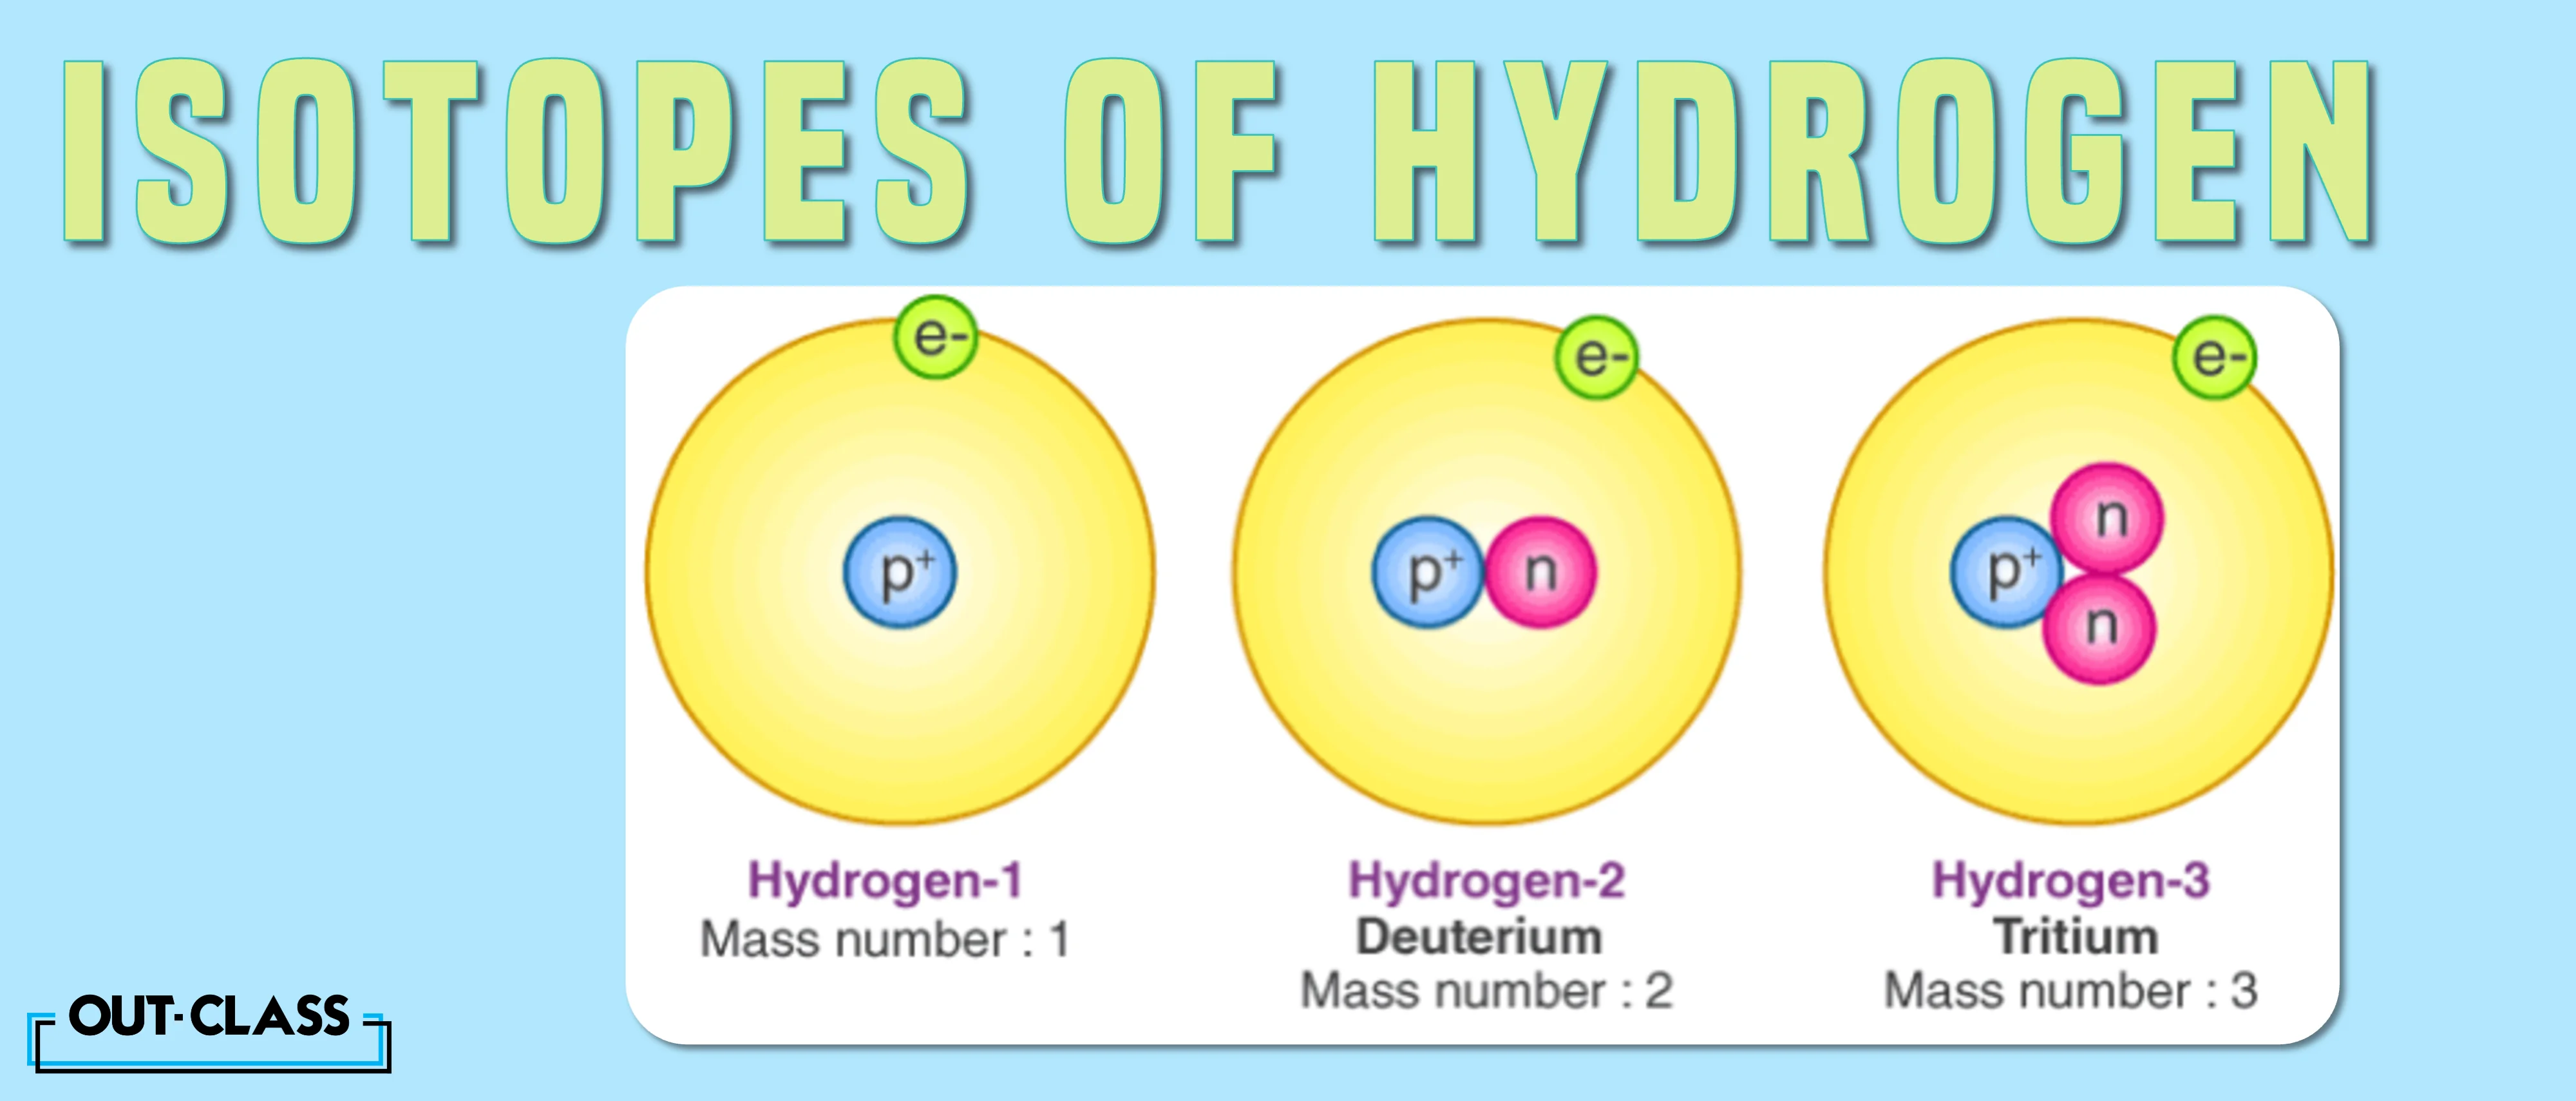 Isotopes in hydrogen: Whereas protium and deuterium have similar chemical properties, water made from heavier deuterium isotope (D2O) has a higher melting and boiling point than water made from protium (H2O).